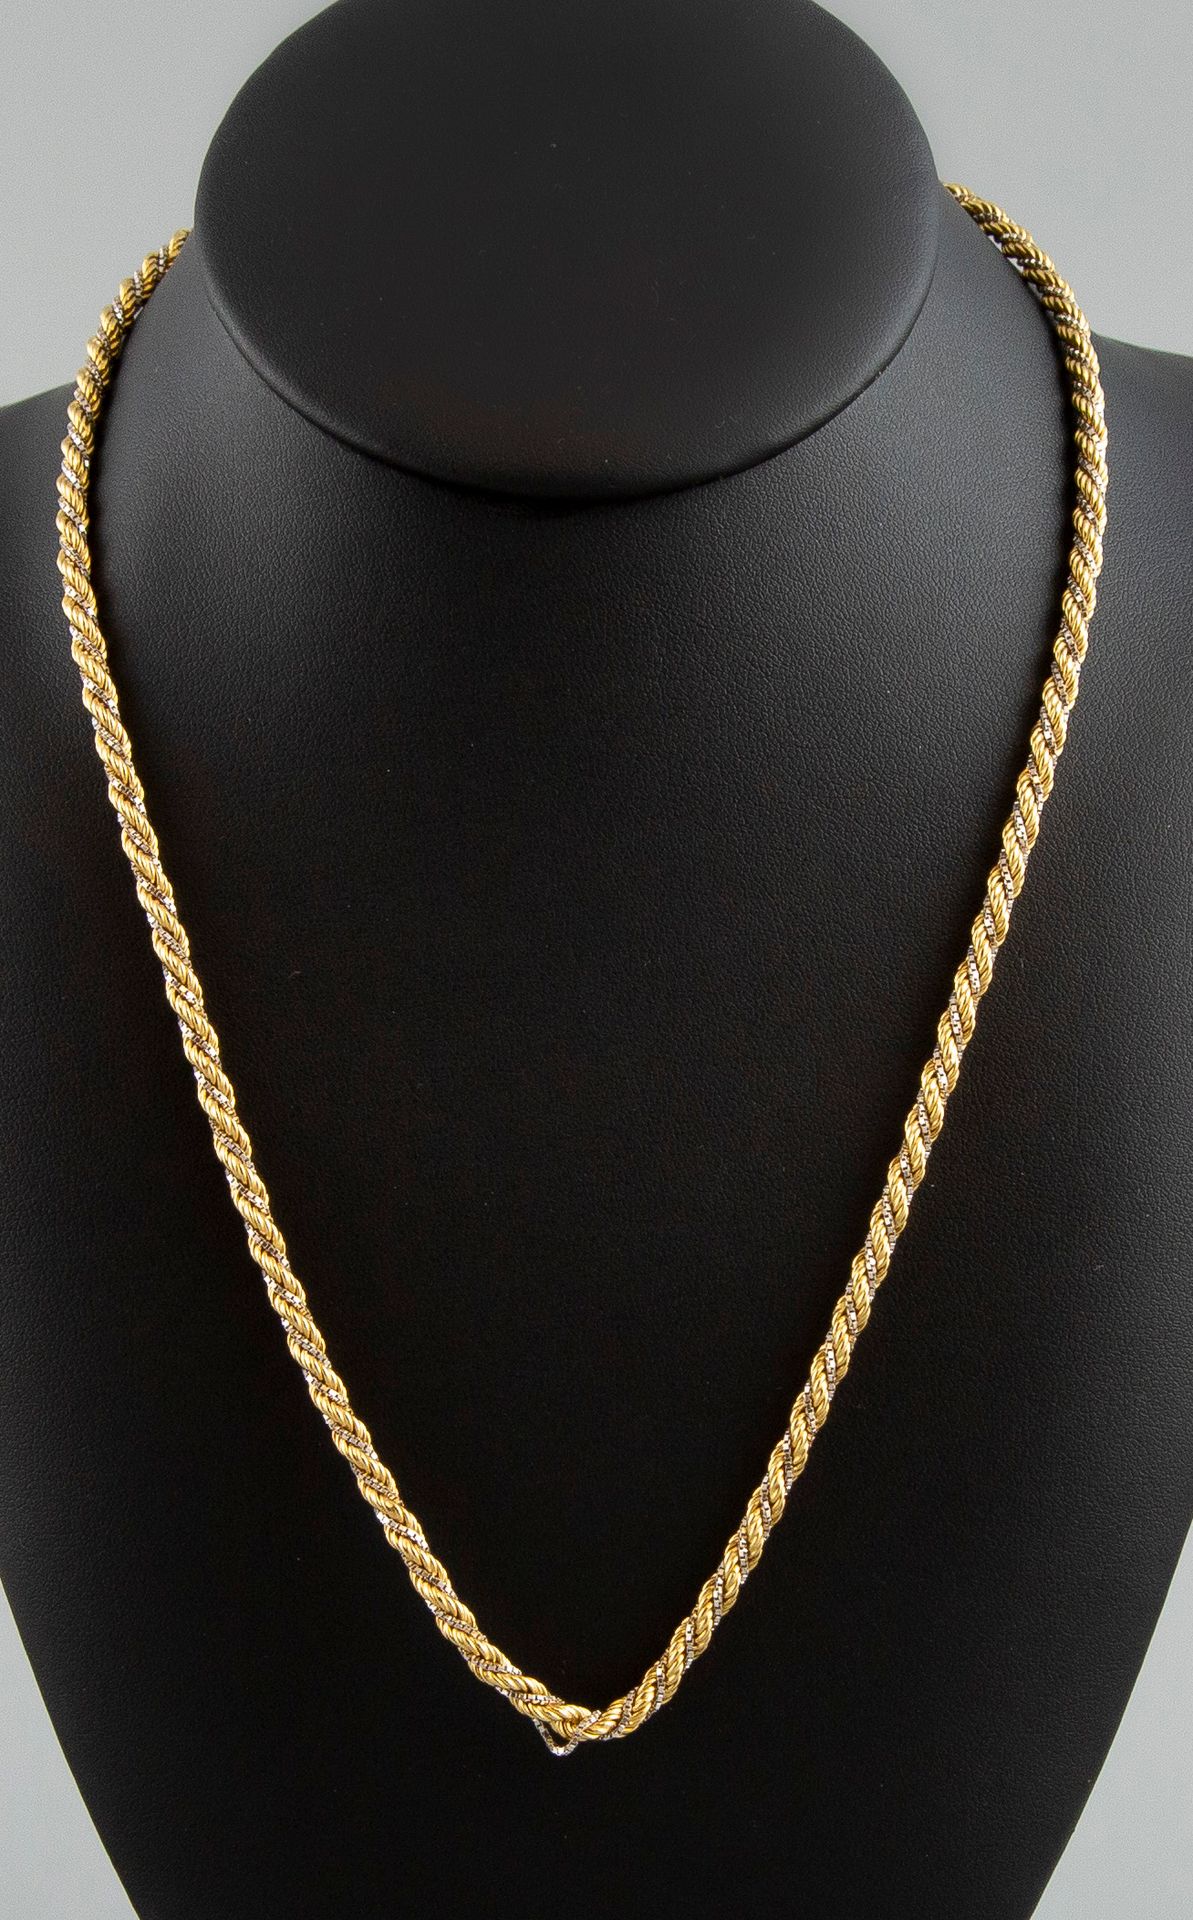 Null Necklace two gold 18K 750°. Weight 18,5g.